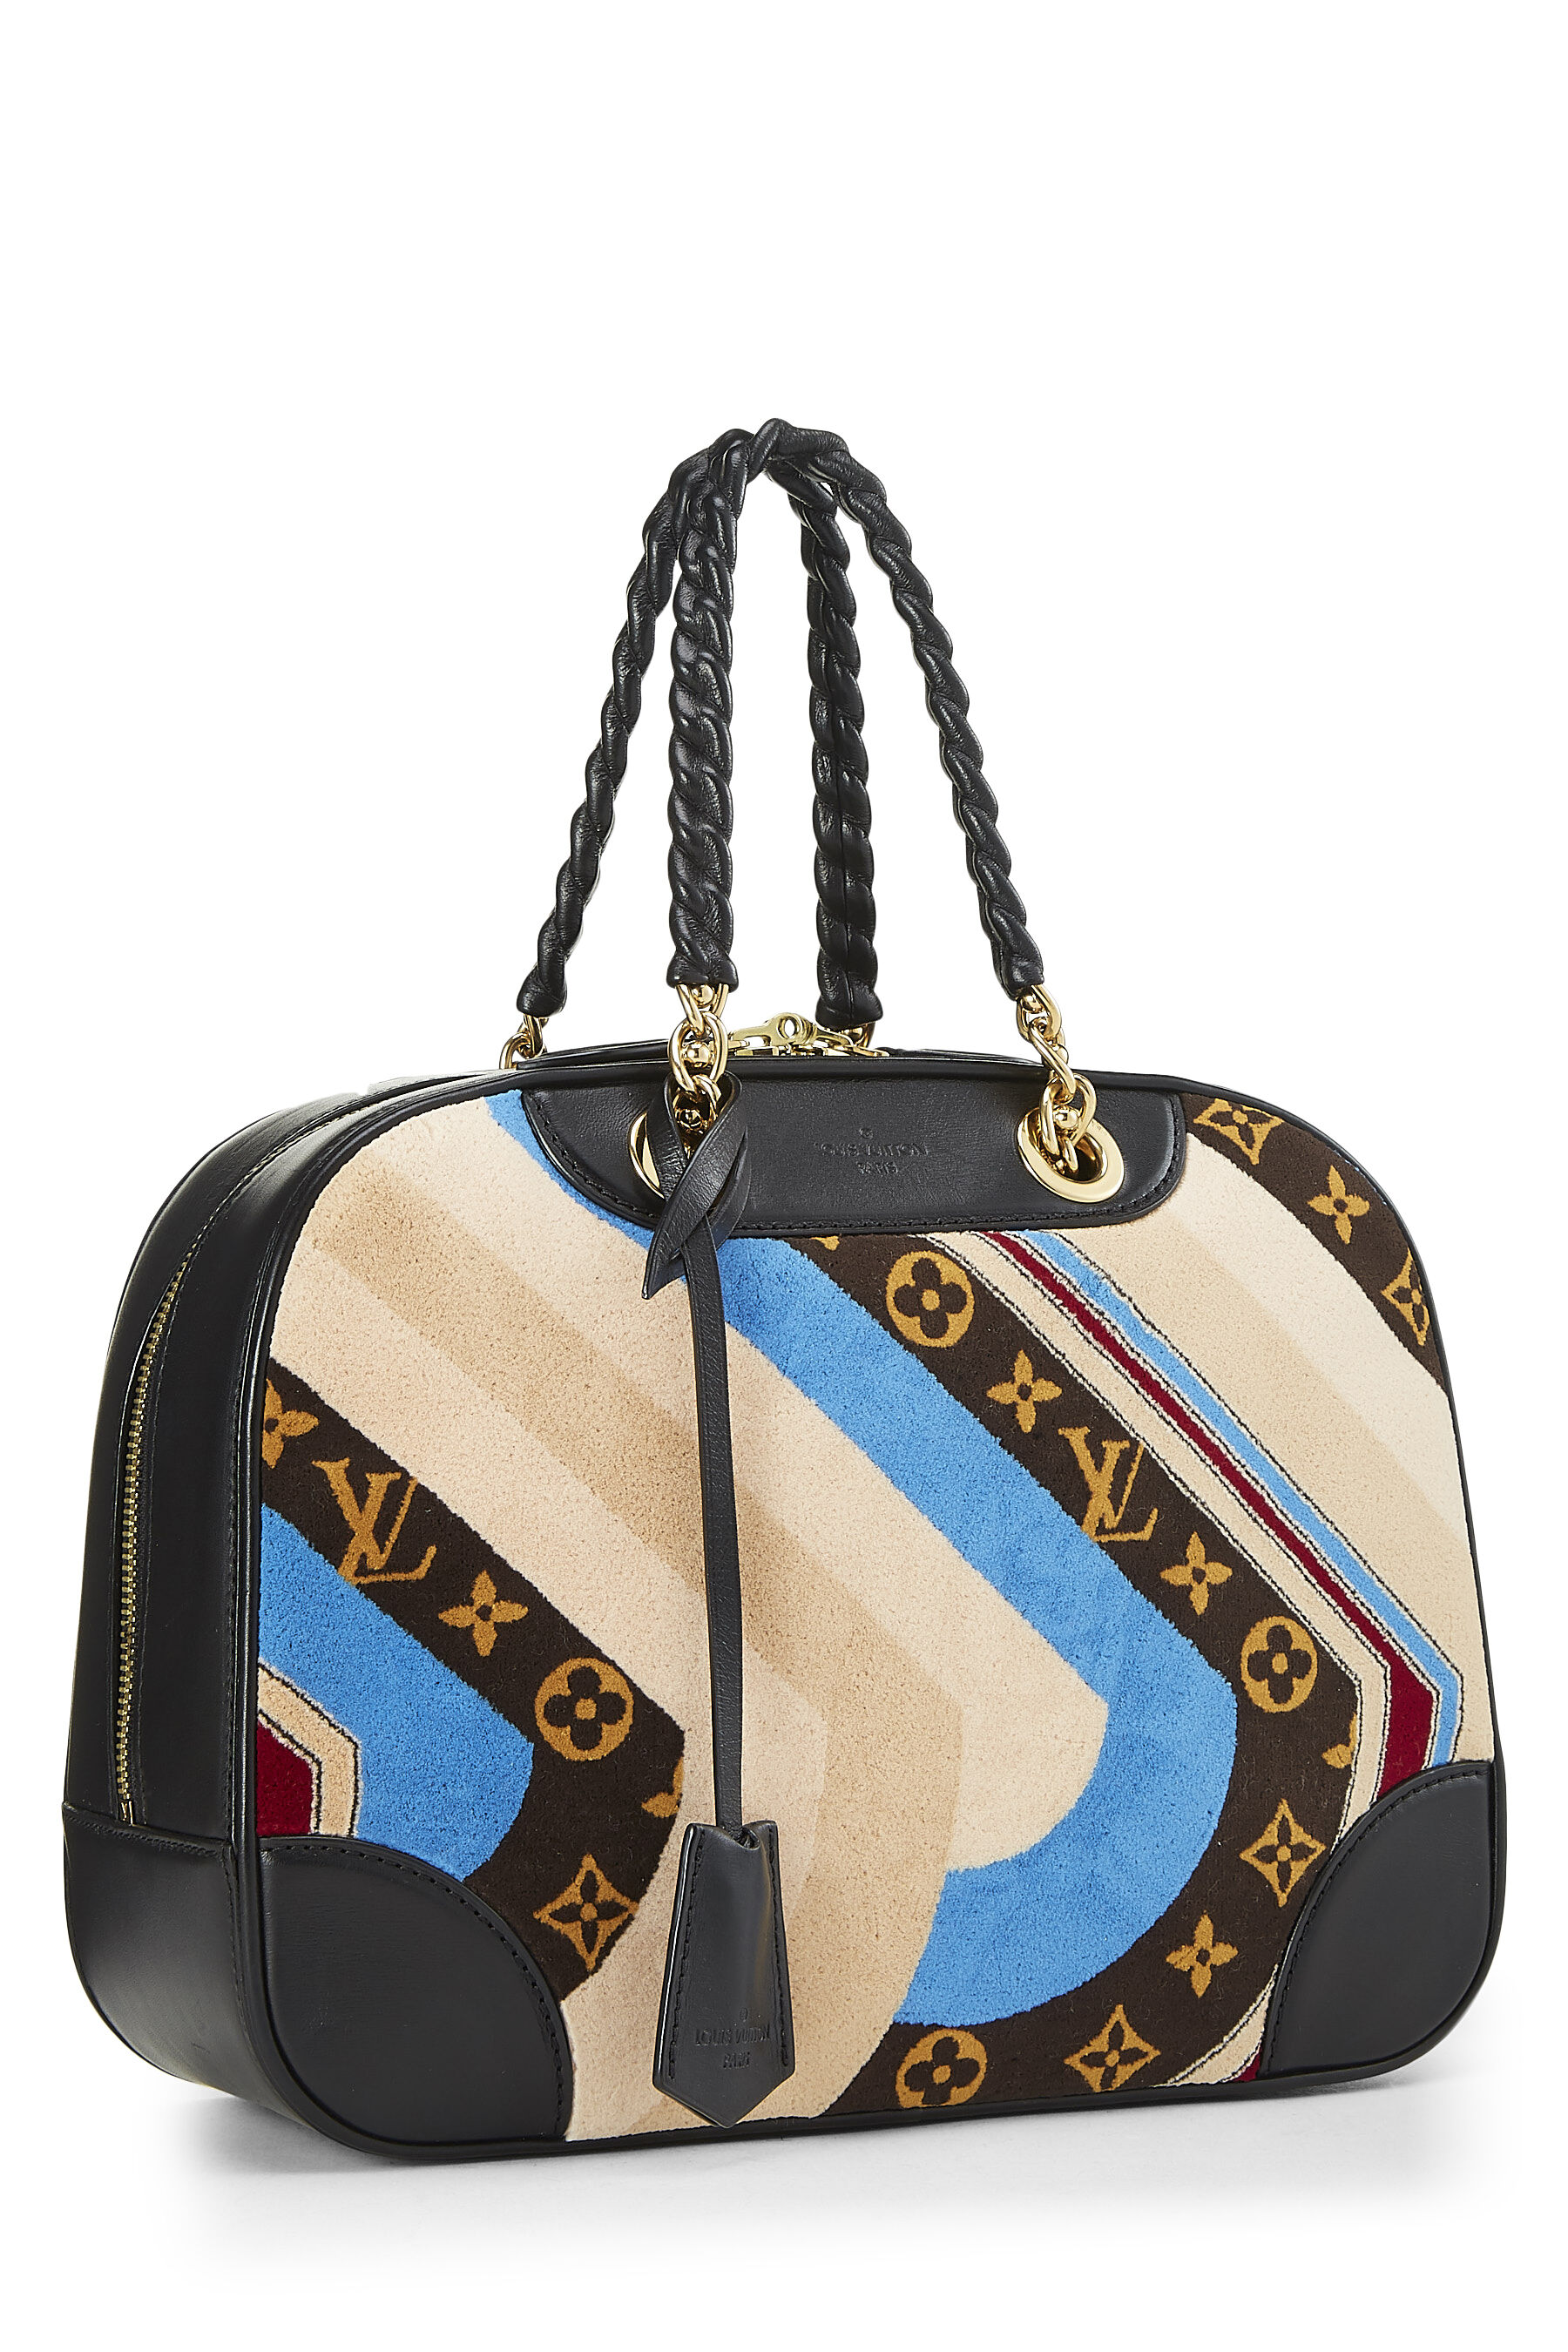 Limited Edition Black Leather and Velour Vanity Tuffetage Bowling Bag, 2014, Handbags & Accessories, 2023